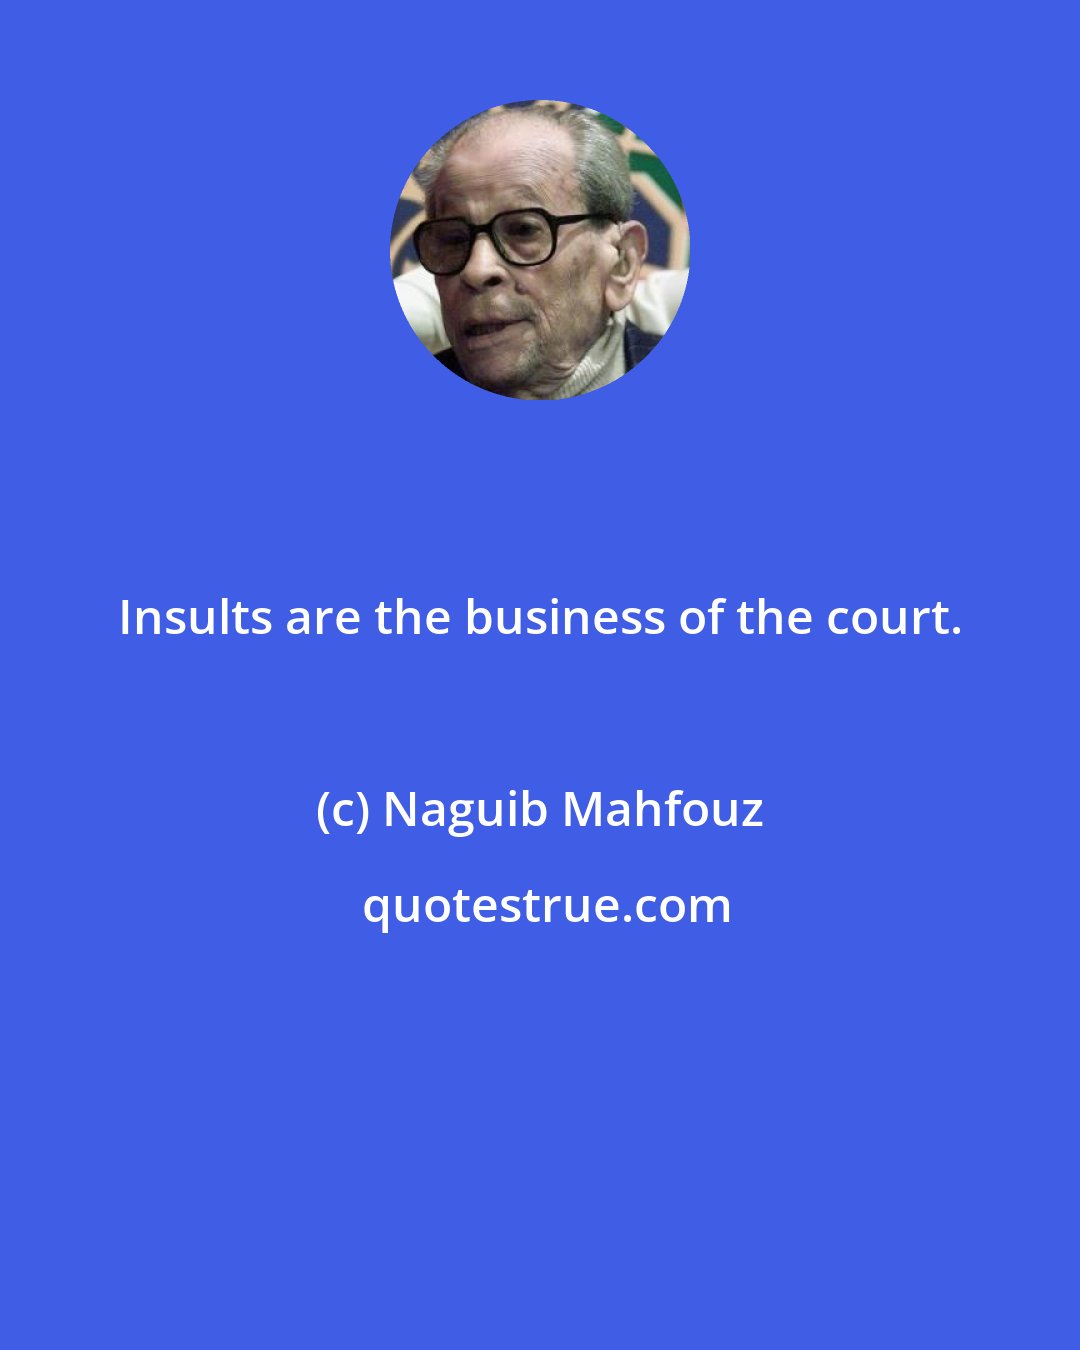 Naguib Mahfouz: Insults are the business of the court.